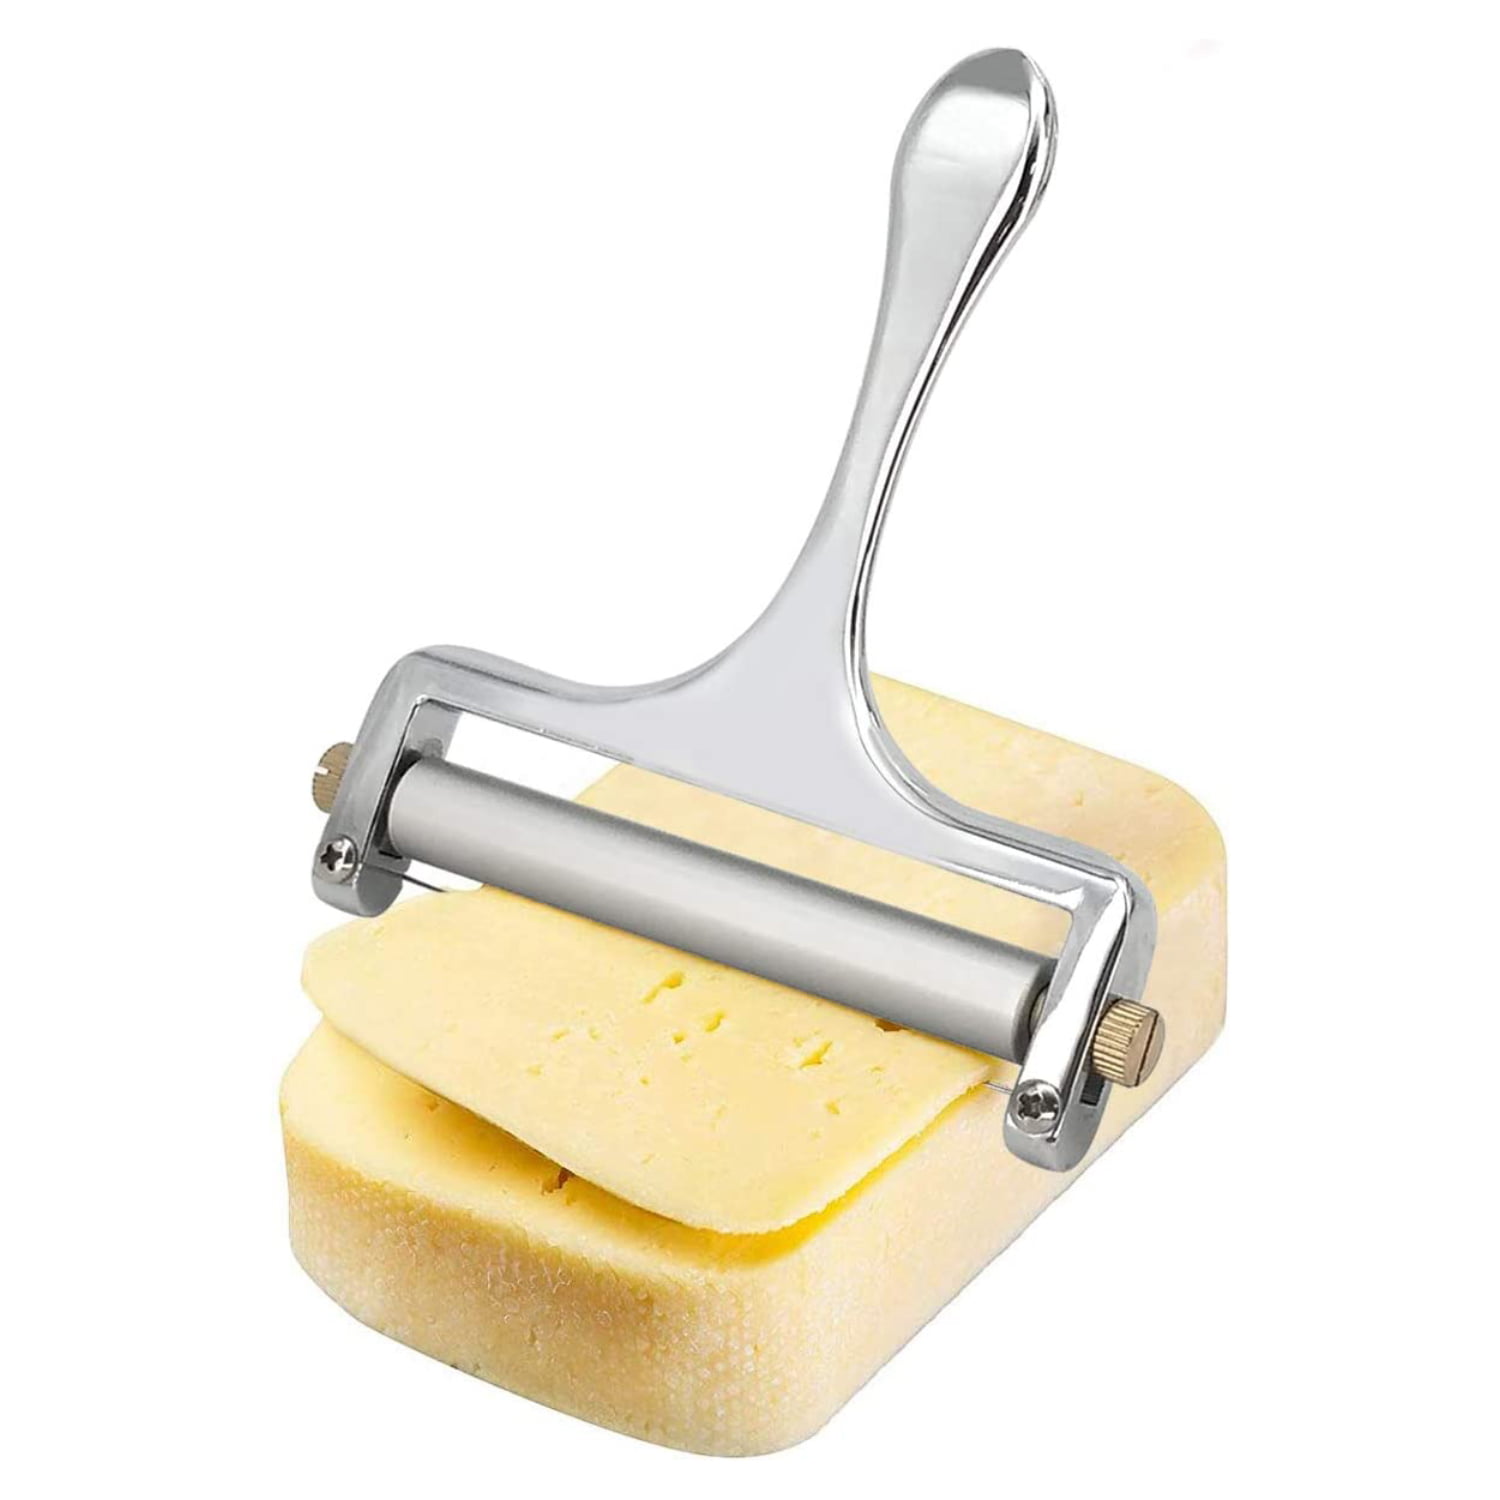 Matfer 072580 Cheese Cutter Hand Held Thickness Of Slice Is